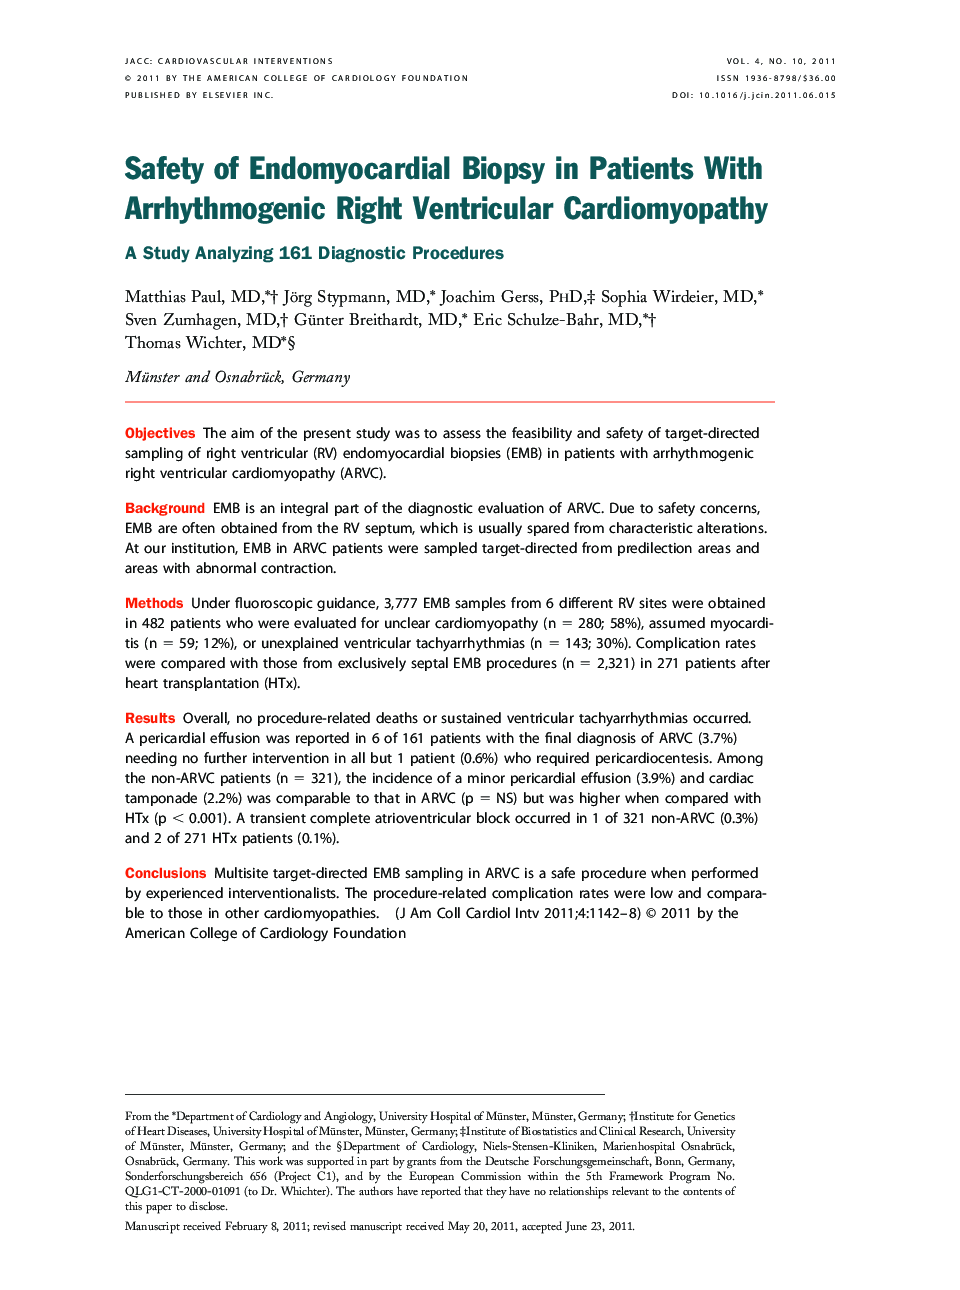 Safety of Endomyocardial Biopsy in Patients With Arrhythmogenic Right Ventricular Cardiomyopathy : A Study Analyzing 161 Diagnostic Procedures